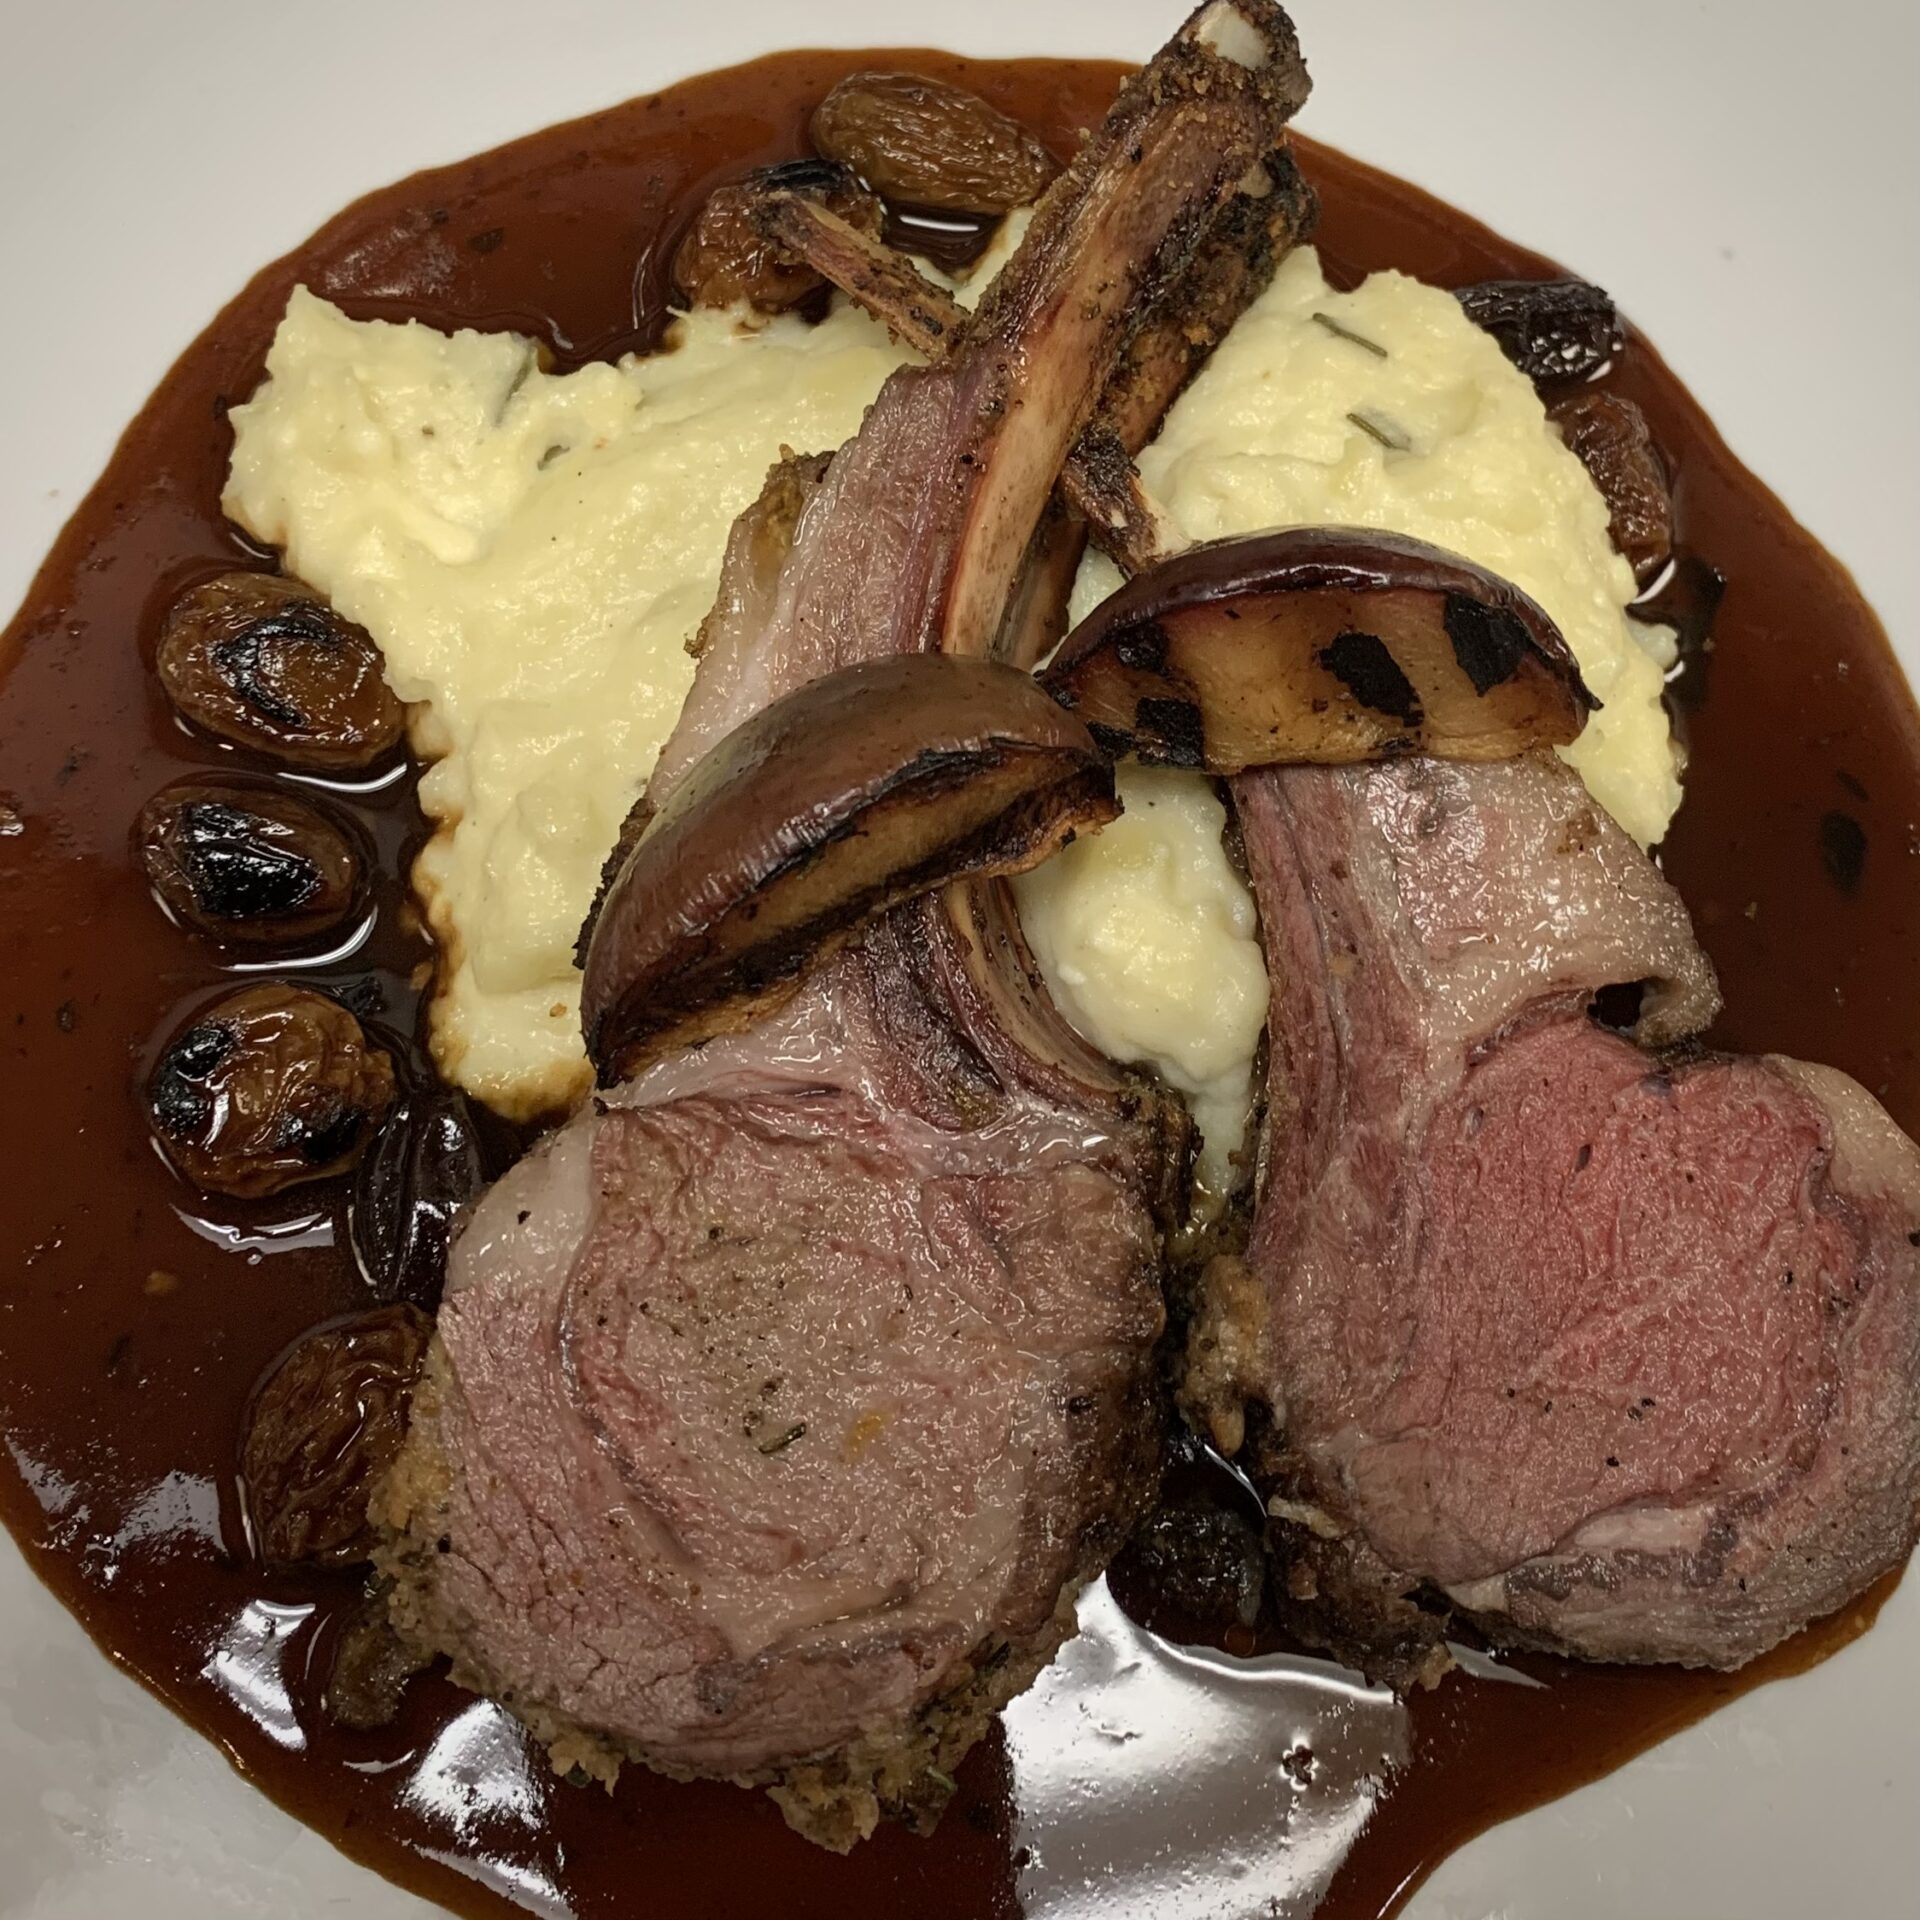 Lamb chops on top of mashed potatoes with brown sauce